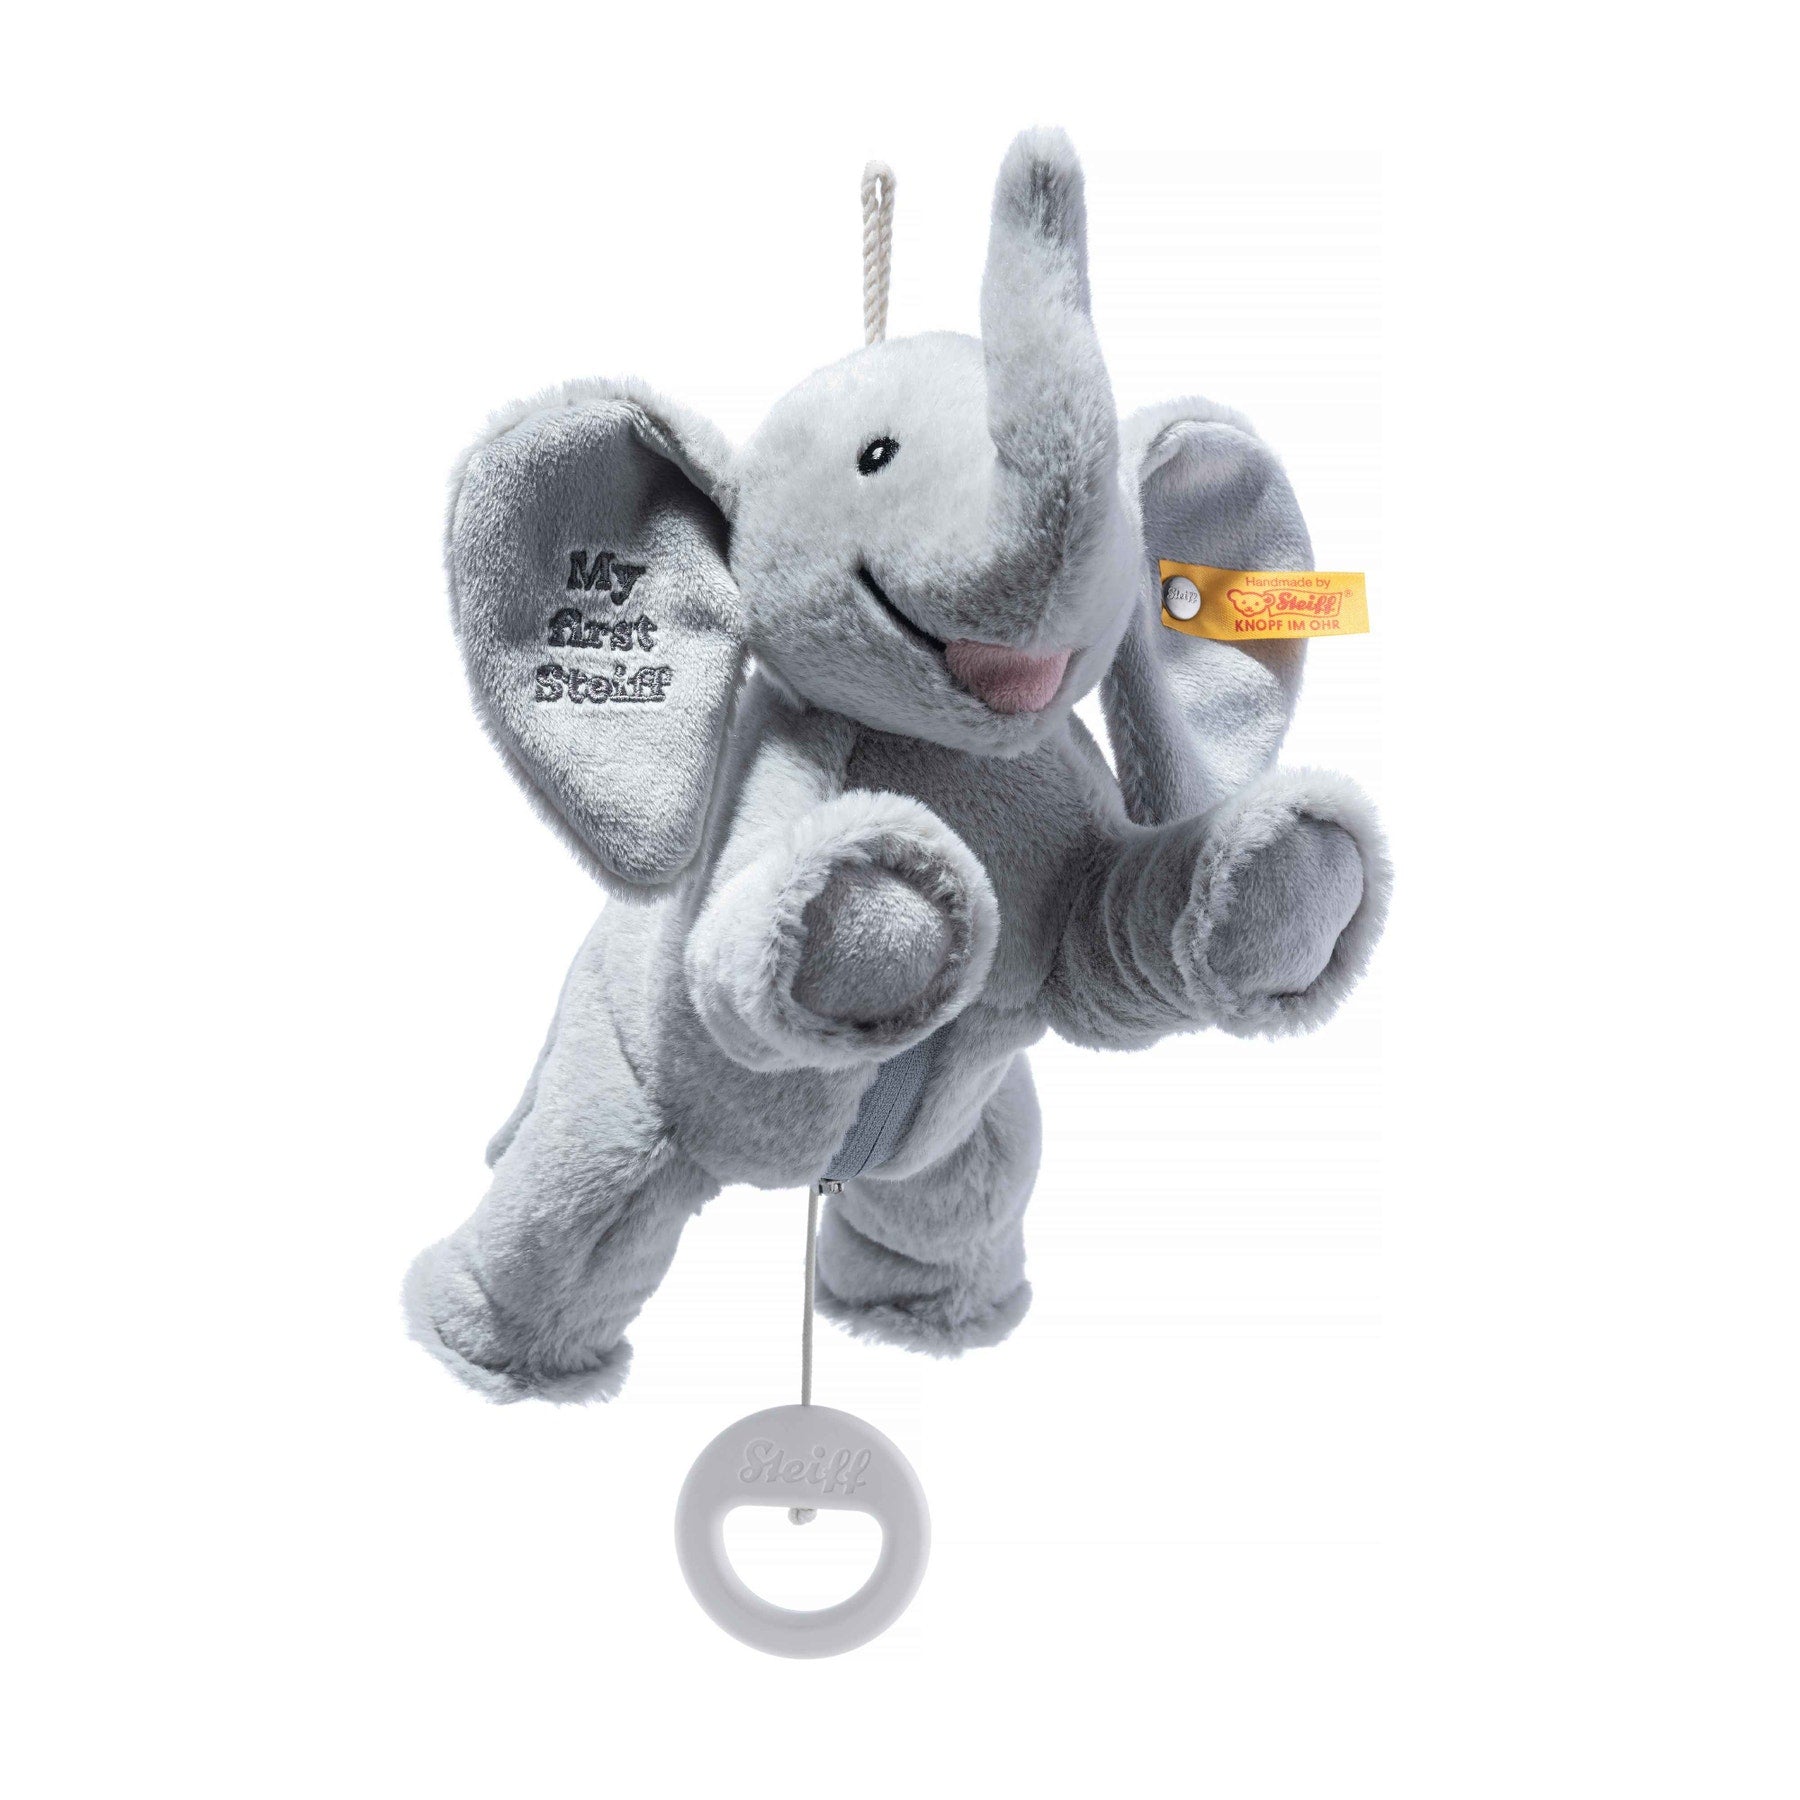 Elephant soft toy with pull-cord, &#39;My First Steiff&#39; embroidery and an authentic Steiff tag